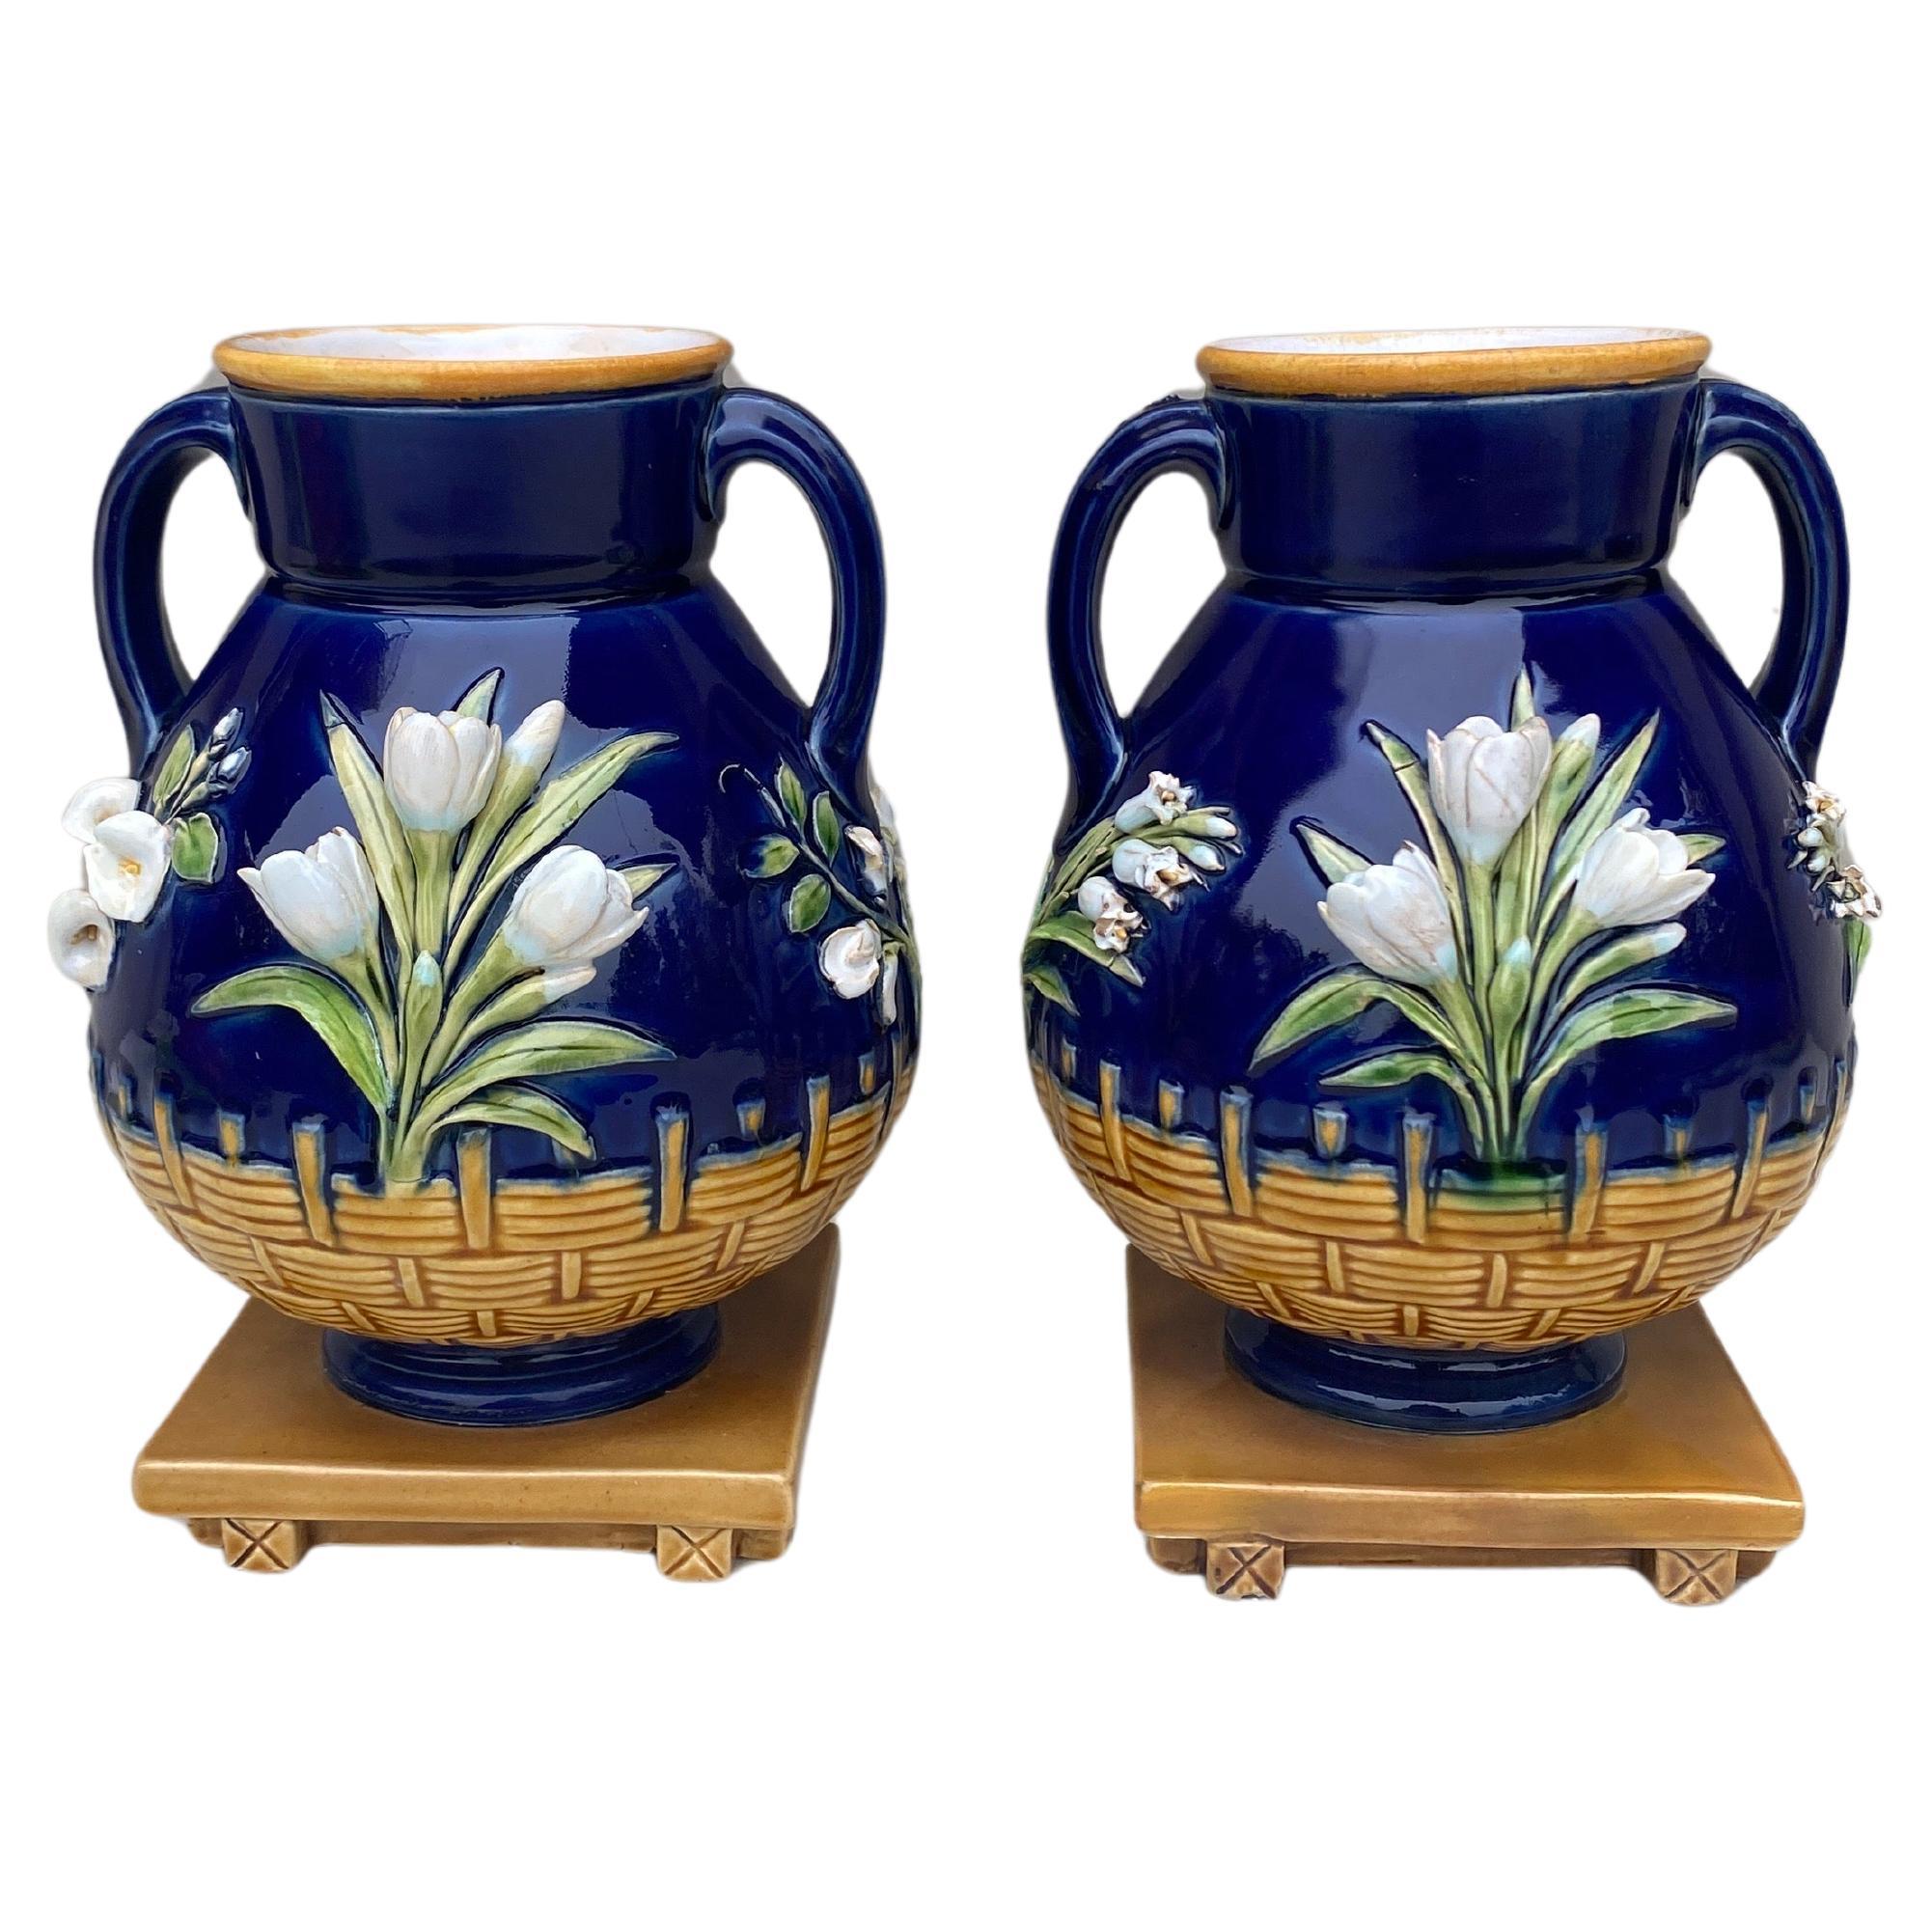 Pair of 19th Century Victorian Cobalt Vases Minton.
Decorated with white flowers.
